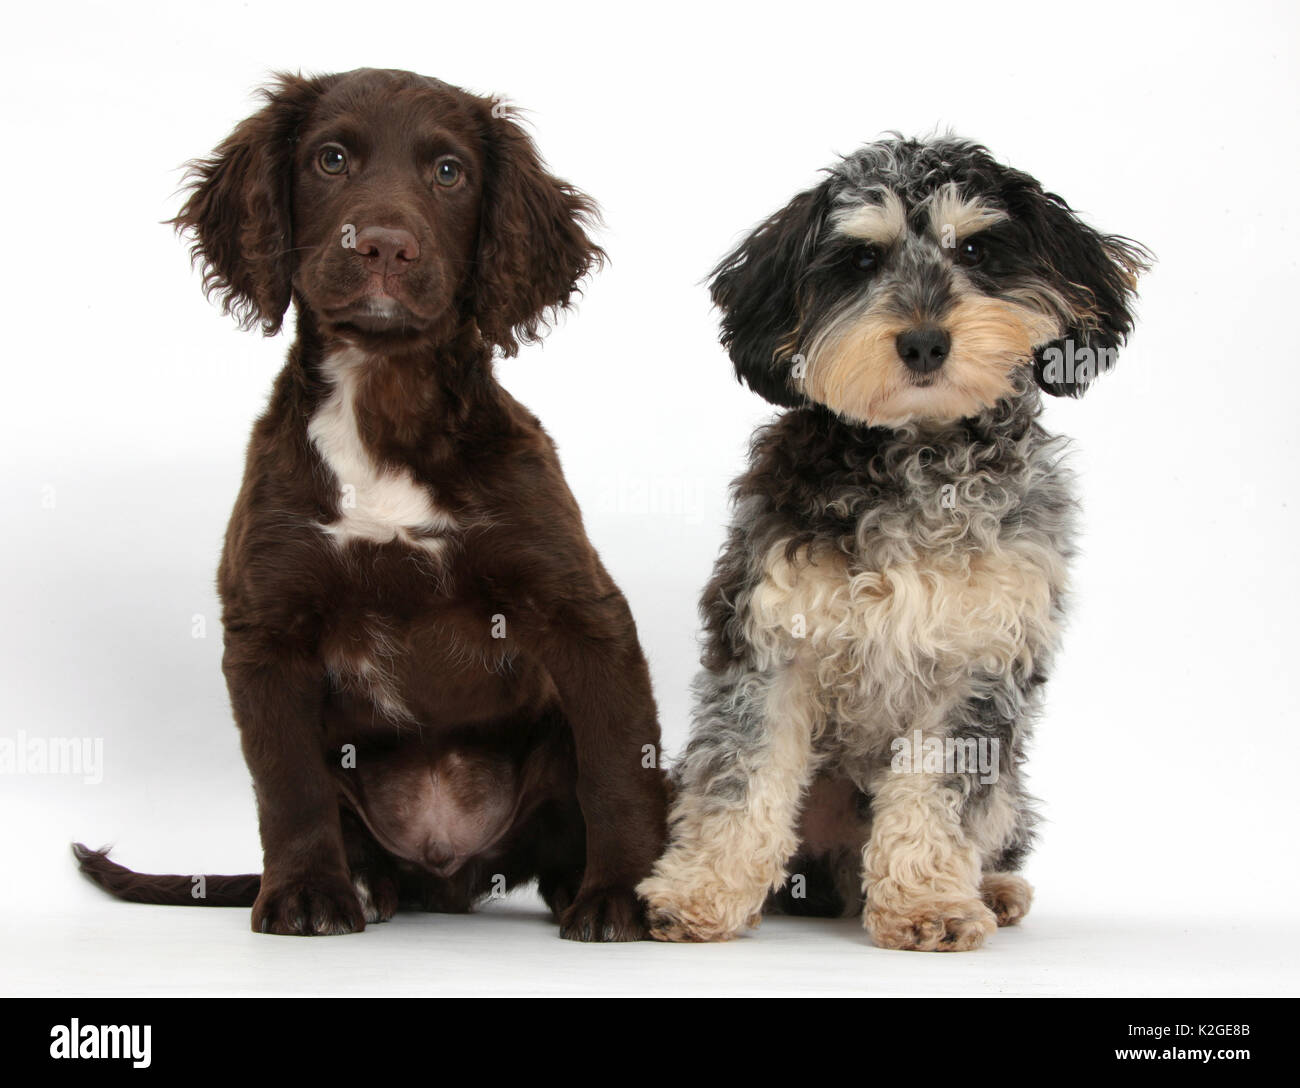 Tricolour merle Daxie-doodle dog, Dachshund cross Poodle, and chocolate Cocker Spaniel. Stock Photo